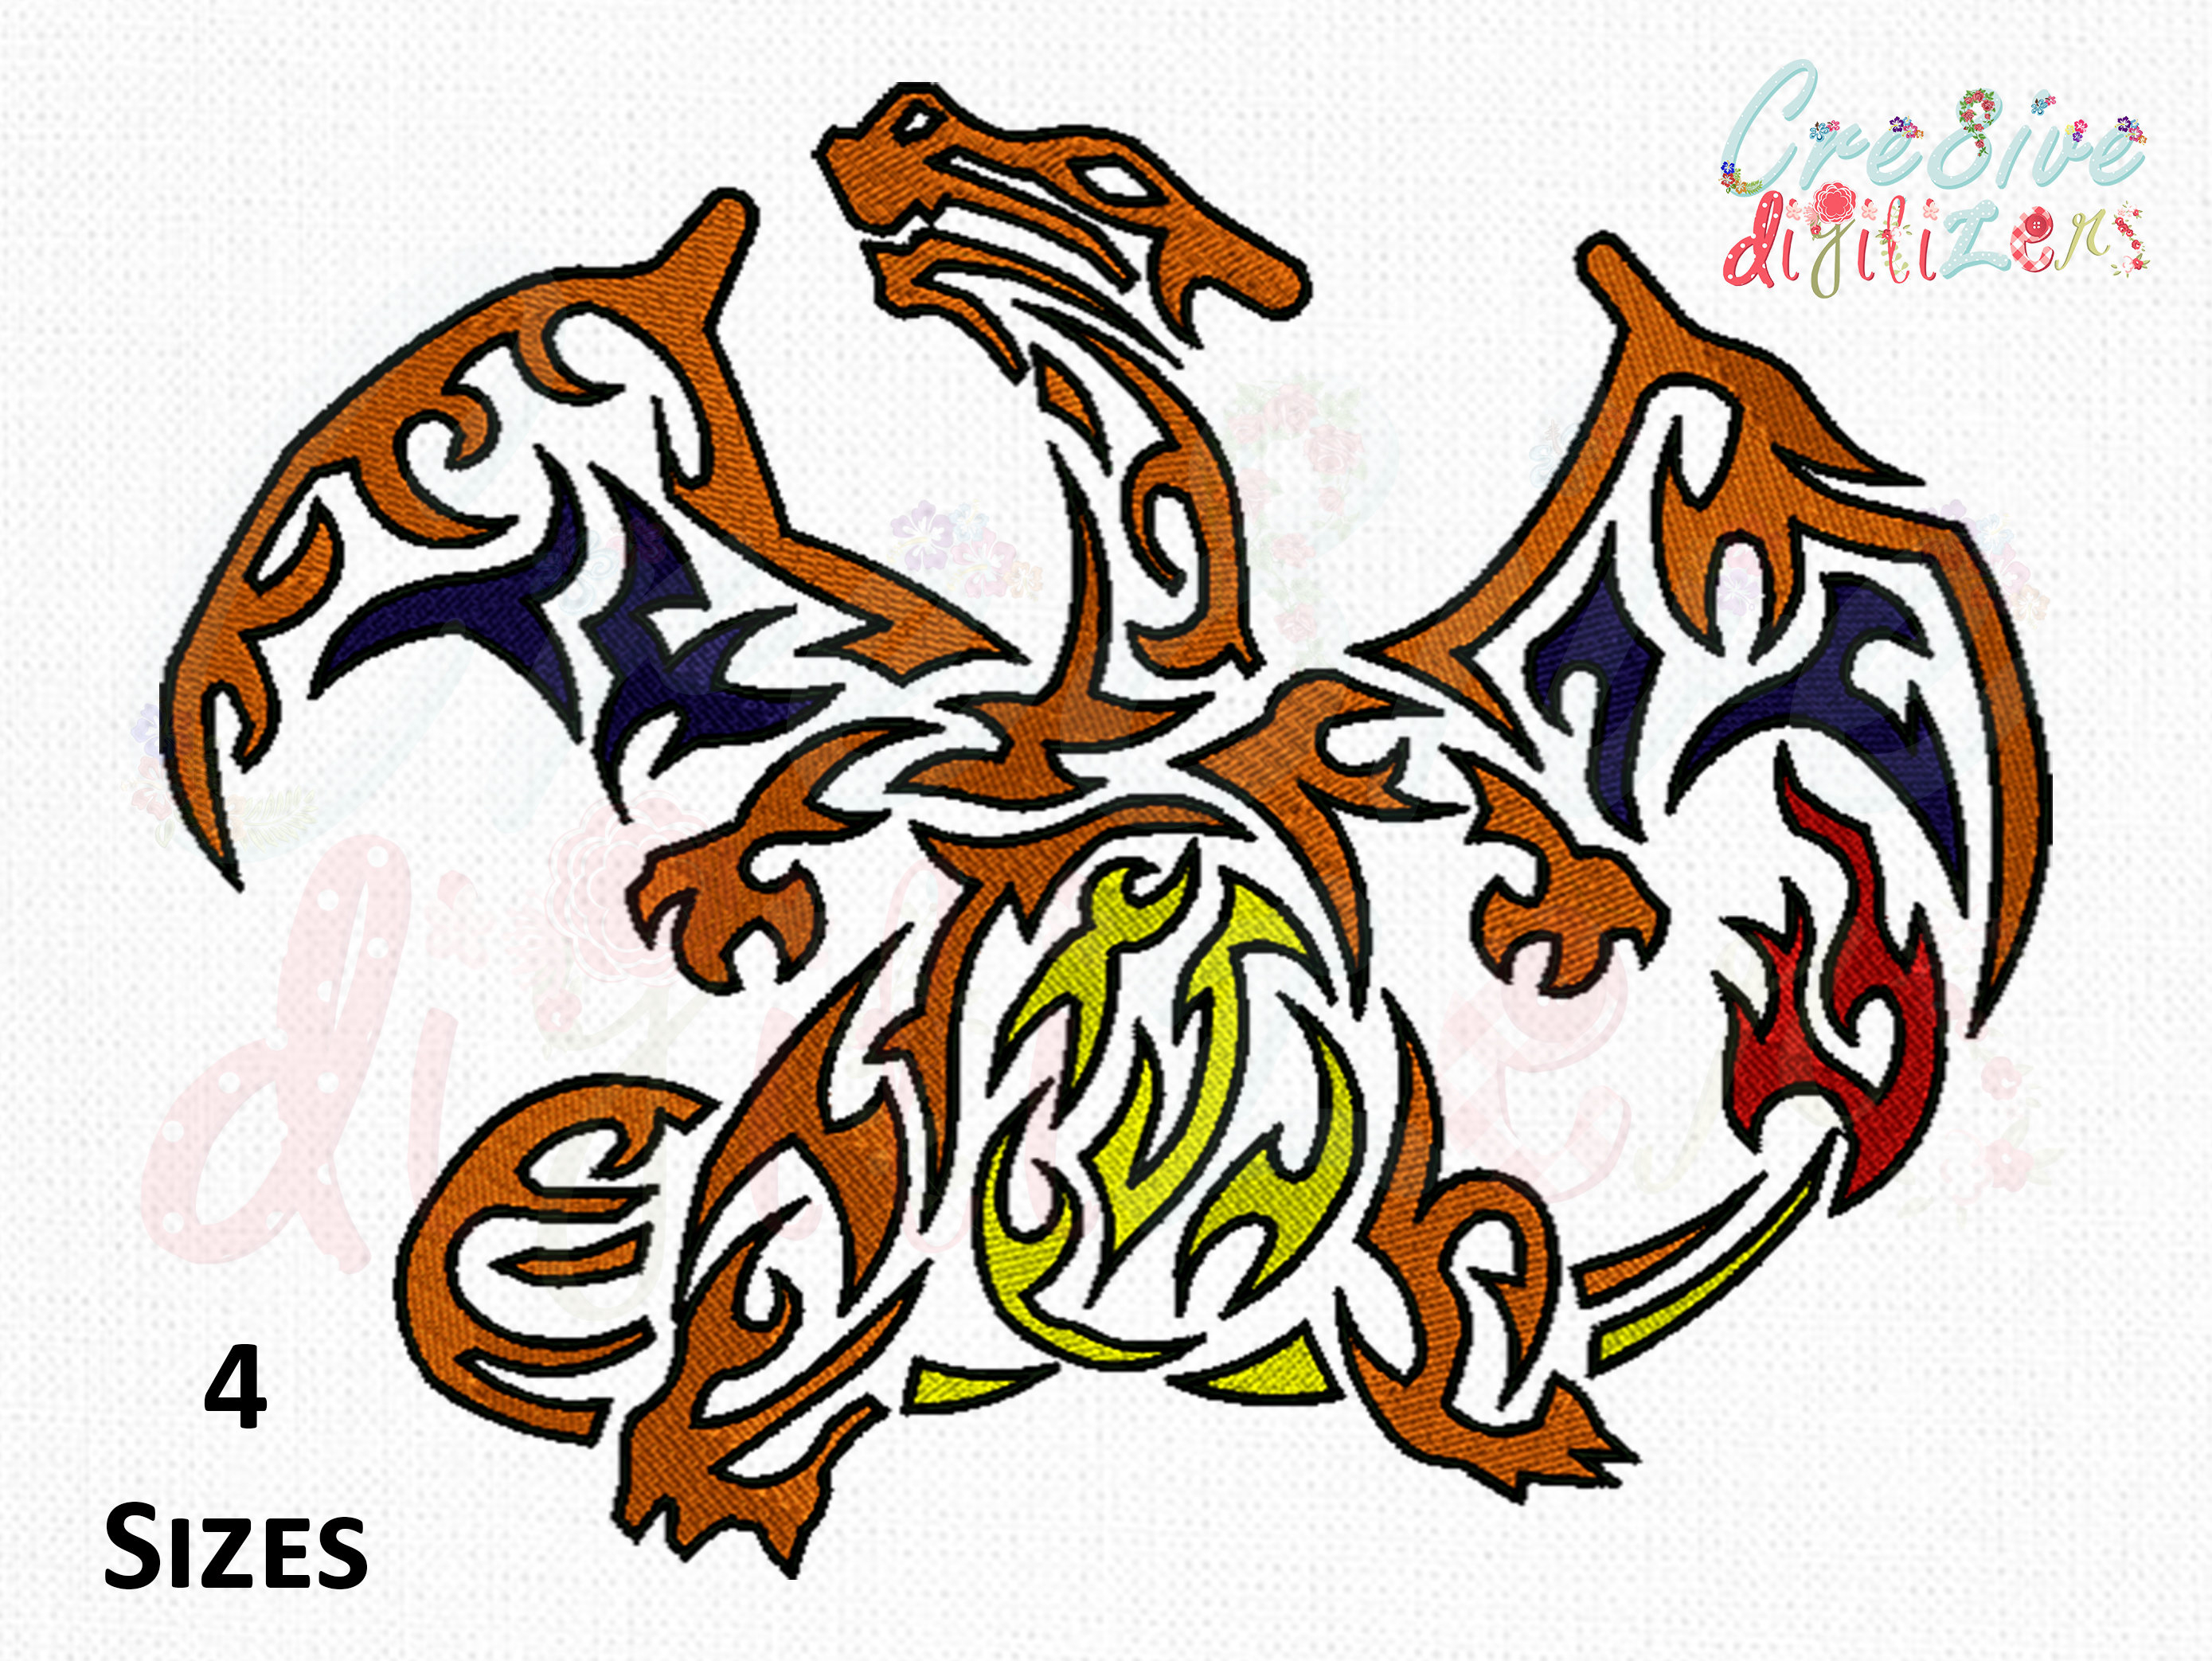 Dragon Embroidery Pattern Dragon Embroidery Design Dragon Machine Embroidery Design 4 Hoop Sizes Cre8ive Digitizers